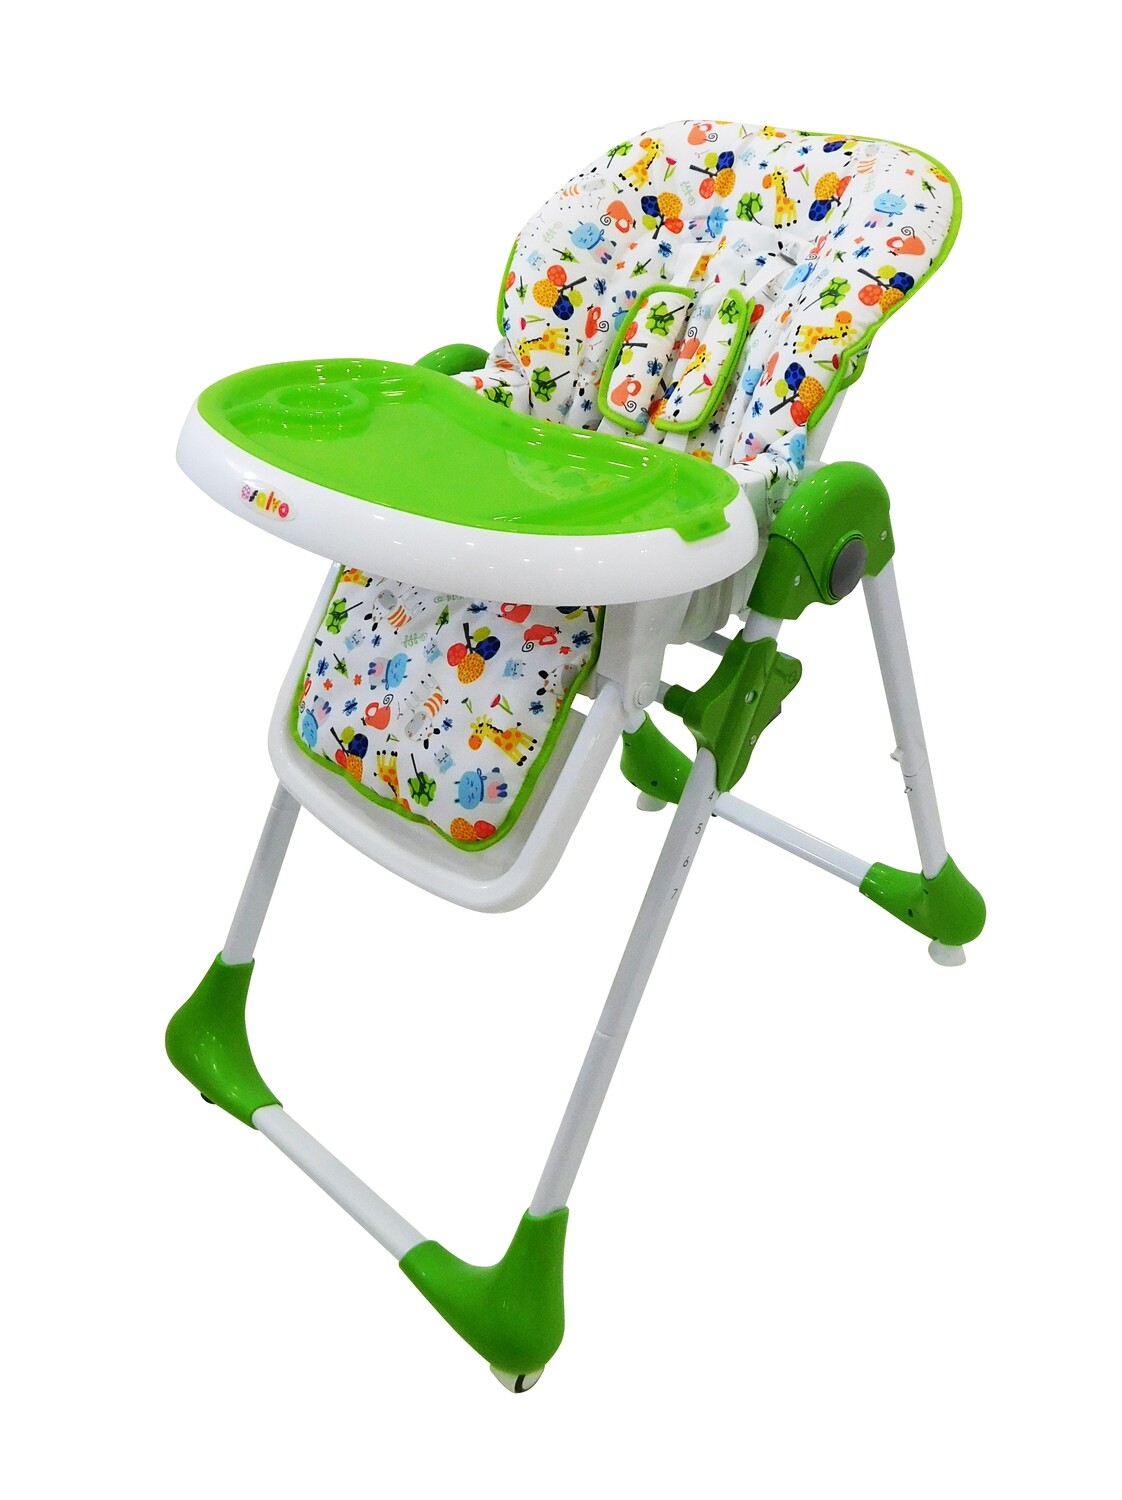 Jungle Green High Chairs for Babies